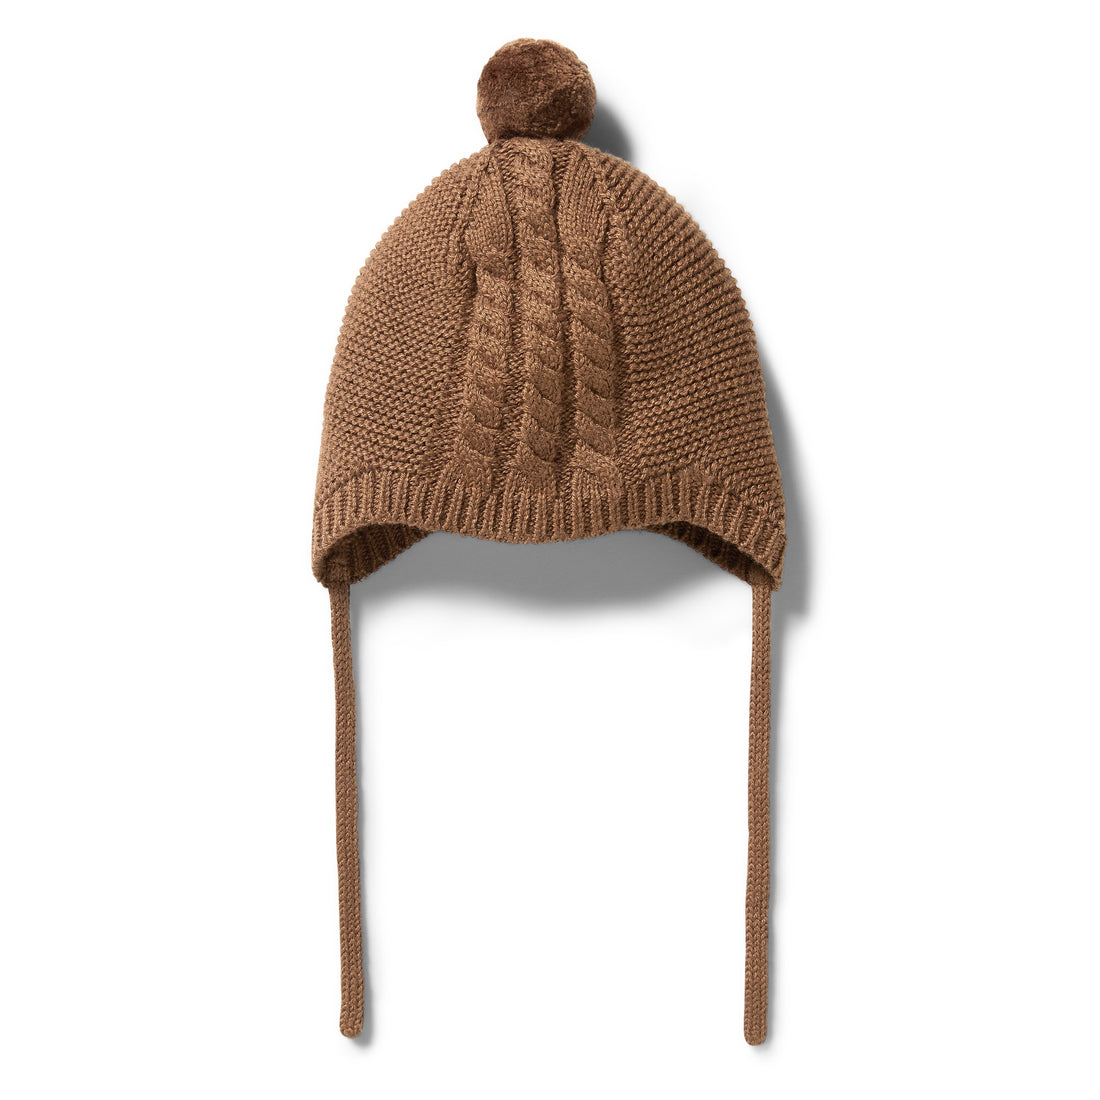 Knitted Cable Bonnet - Dijon